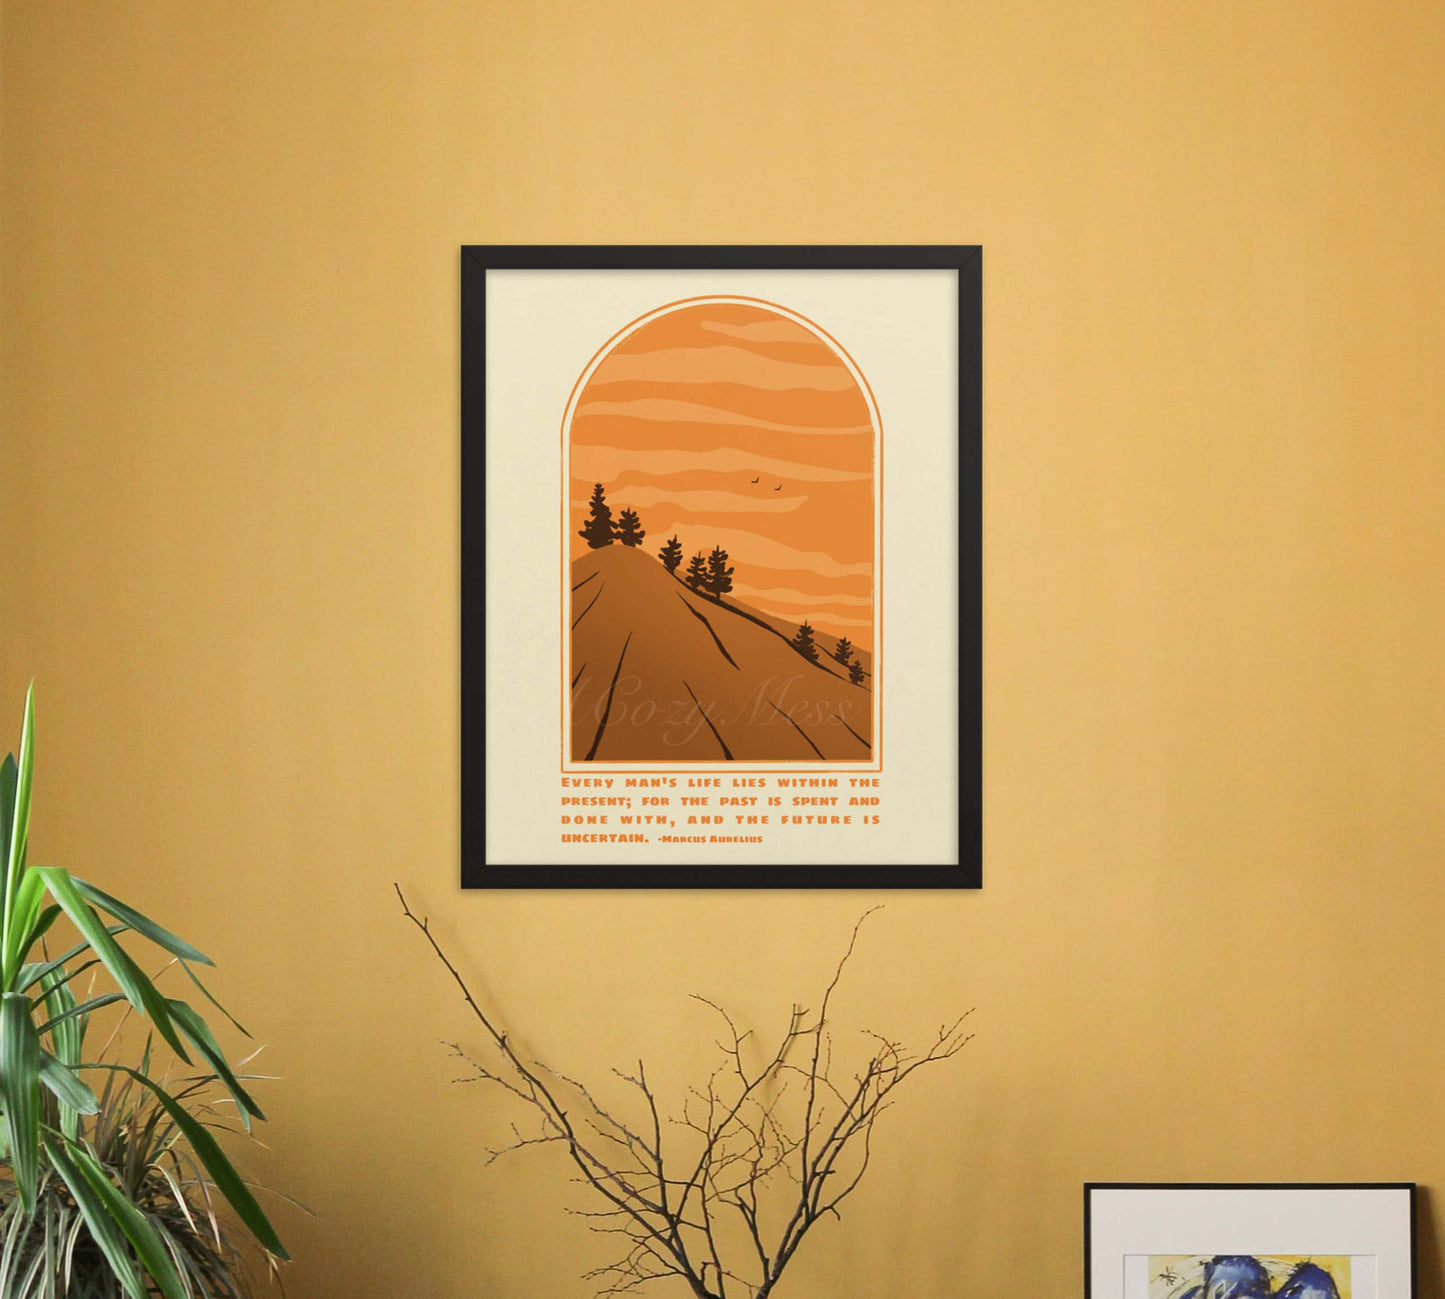 A tranquil landscape art poster framed in black, featuring a road and trees set against an orange sky. It's accentuated with a Marcus Aurelius quote on living in the present, designed to inspire mindfulness and serenity in any space.